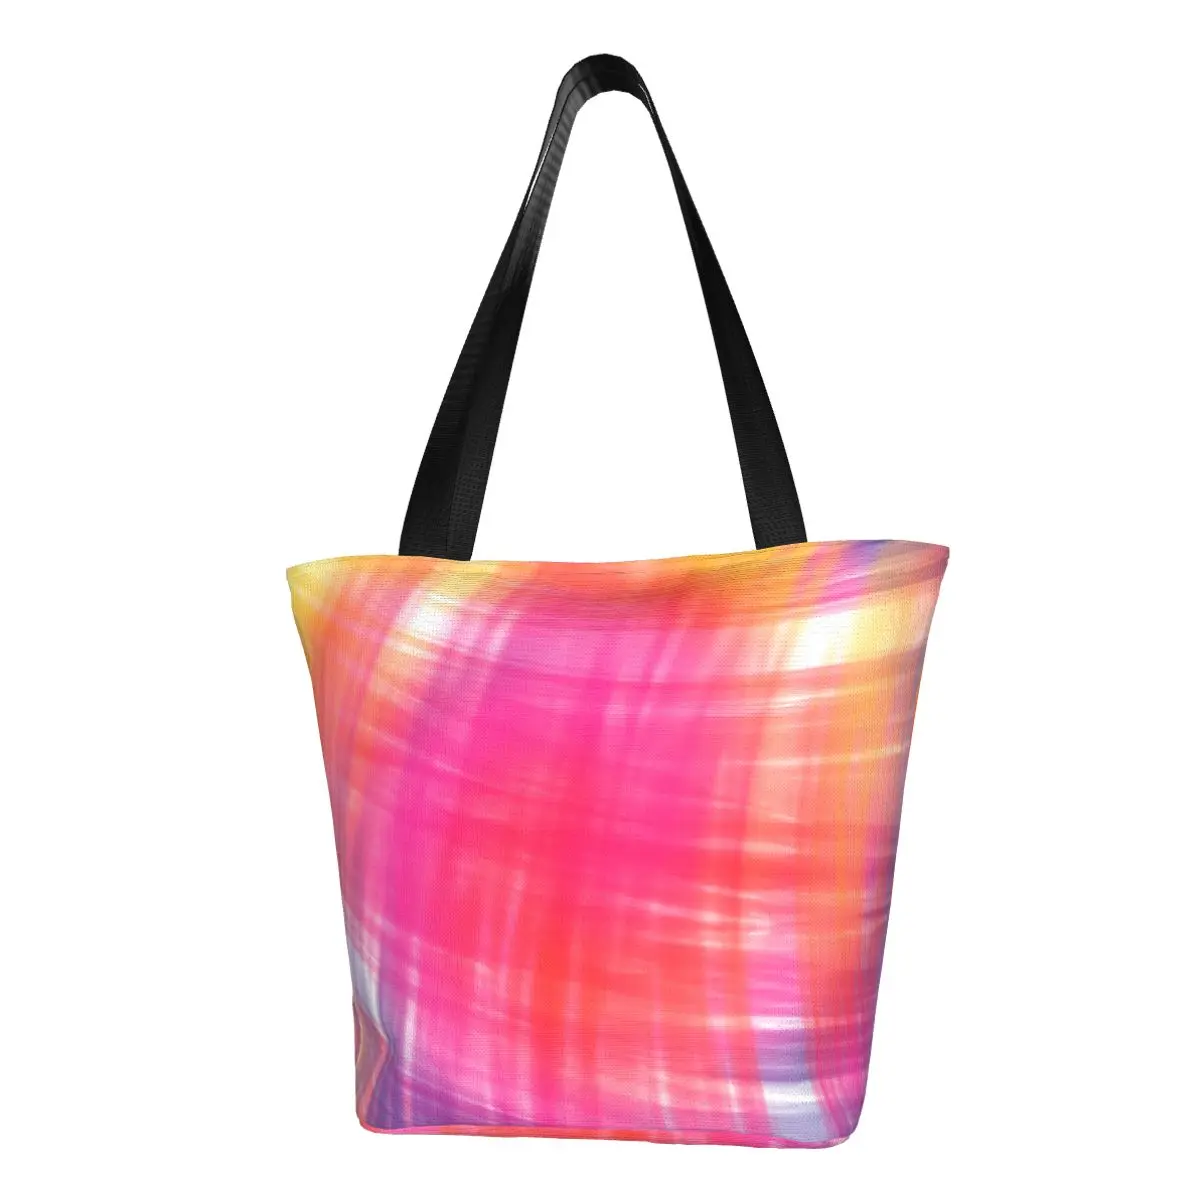 

Curving Tie Dye Shopper Bag Abstract Ombre Shopping Bags Student Office Cloth Tote Bag Novelty Print Handbags